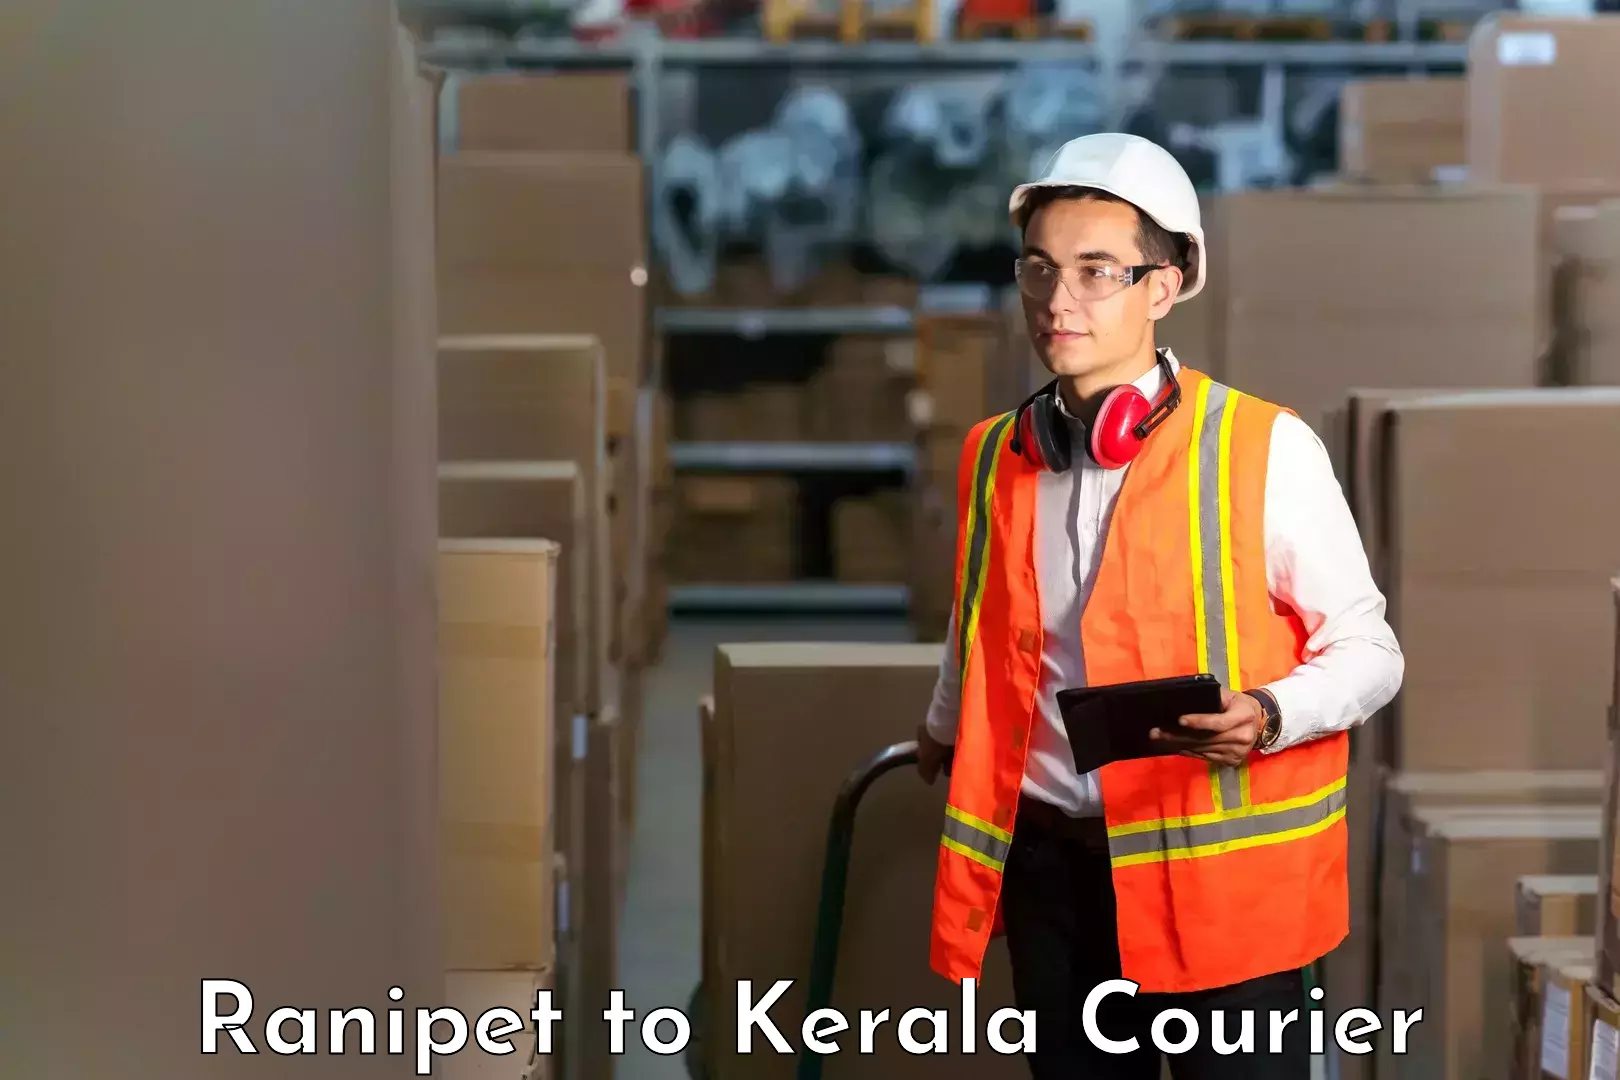 Subscription-based courier Ranipet to Ernakulam